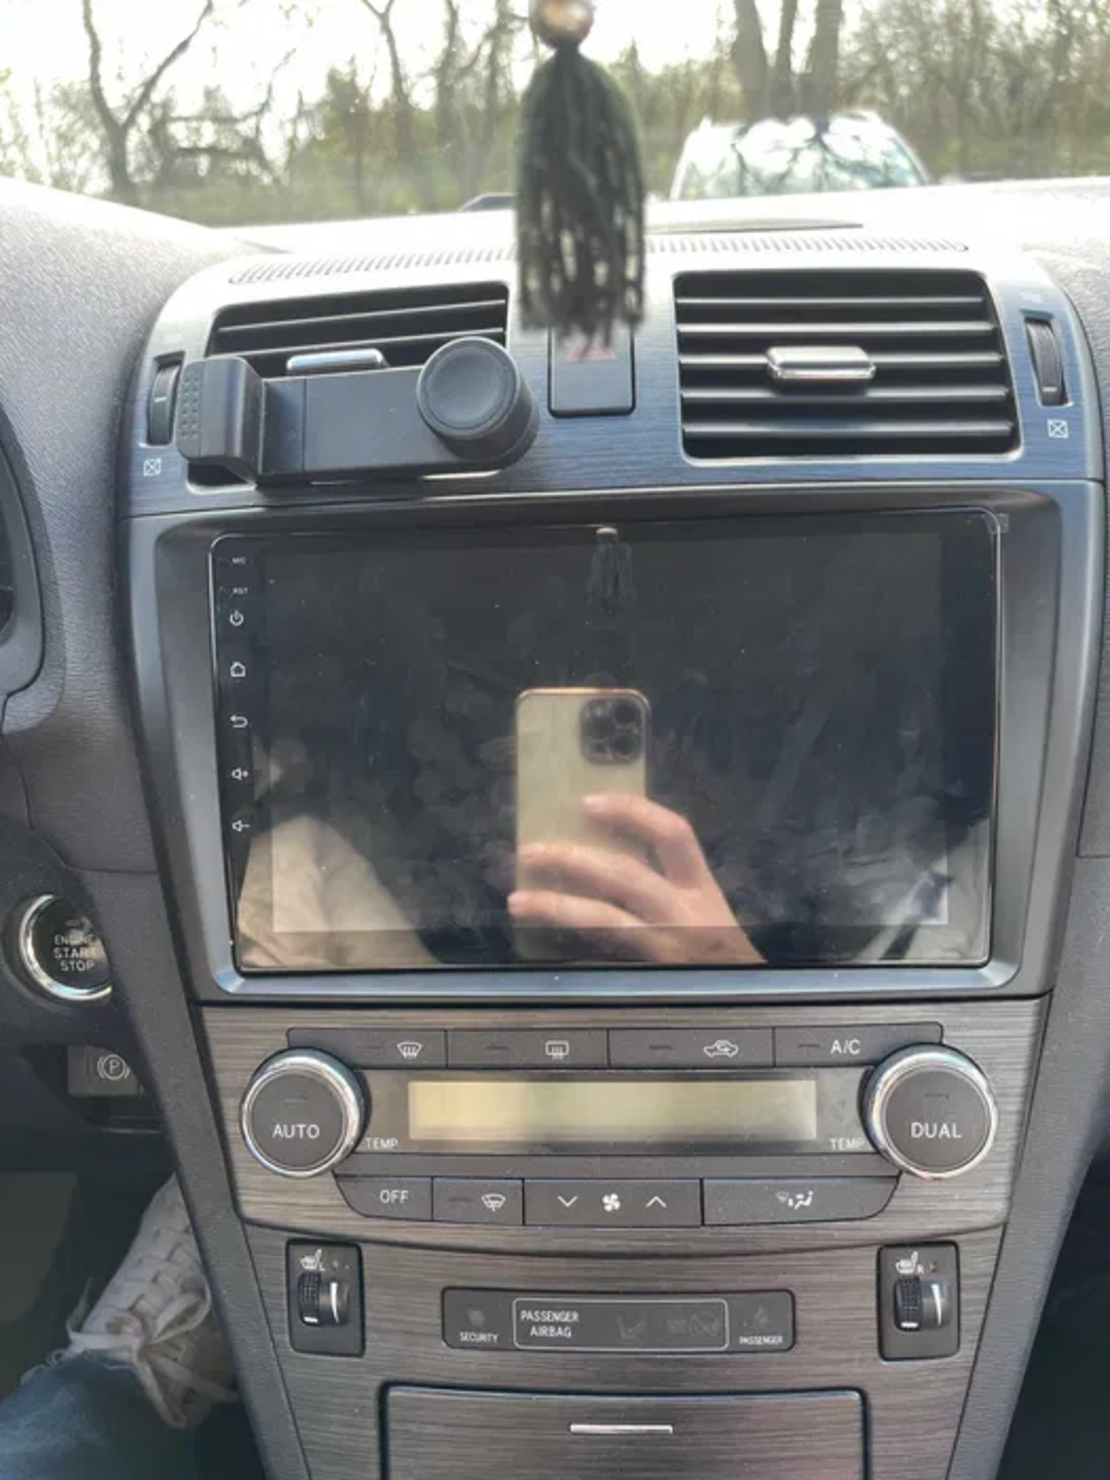 Toyota Avensis T27 2008- 2015 Android Multimedia/Navigation